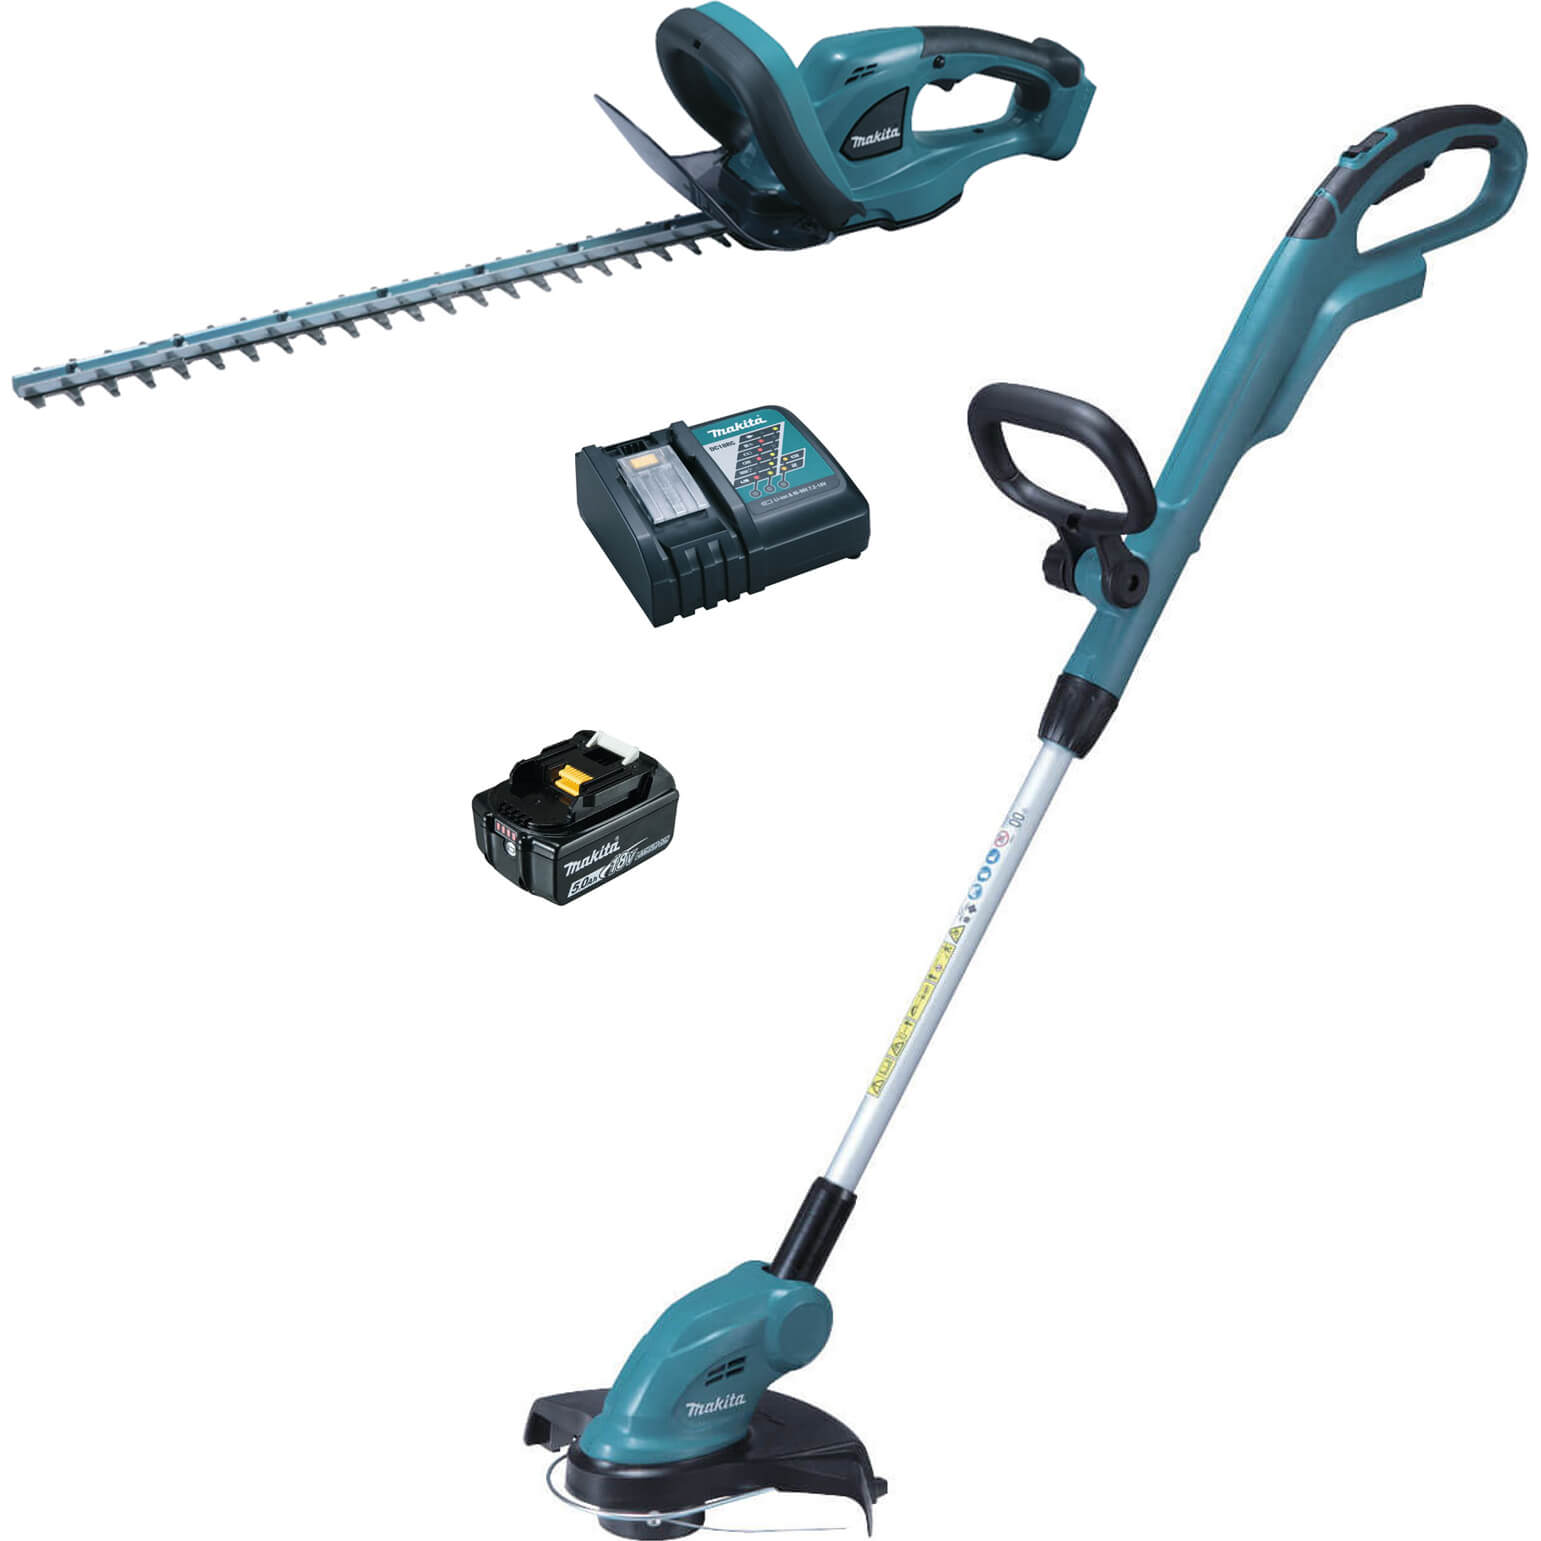 Image of Makita 18v LXT Cordless Grass and Hedge Trimmer Kit 1 x 5ah Li-ion Charger